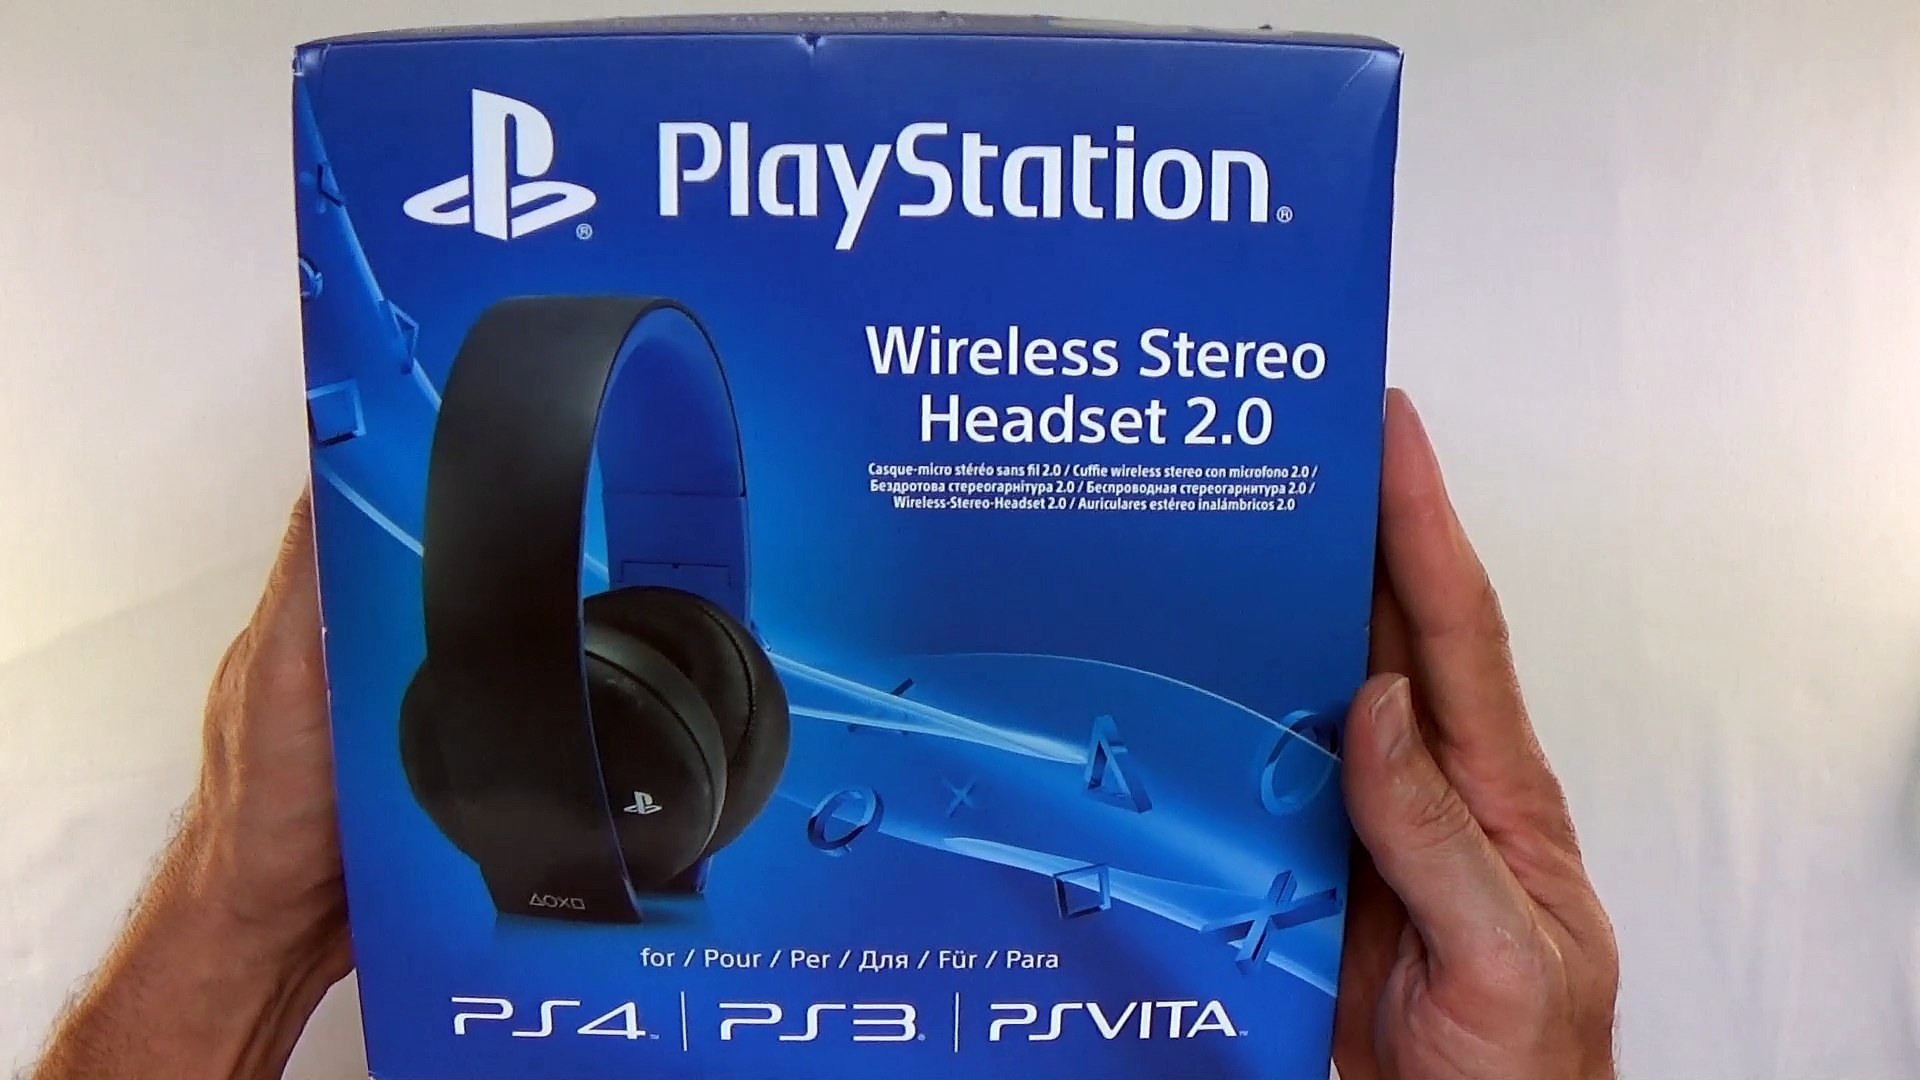 Unboxing Wireless Stereo Headset 2.0 PlayStation - Vídeo Dailymotion